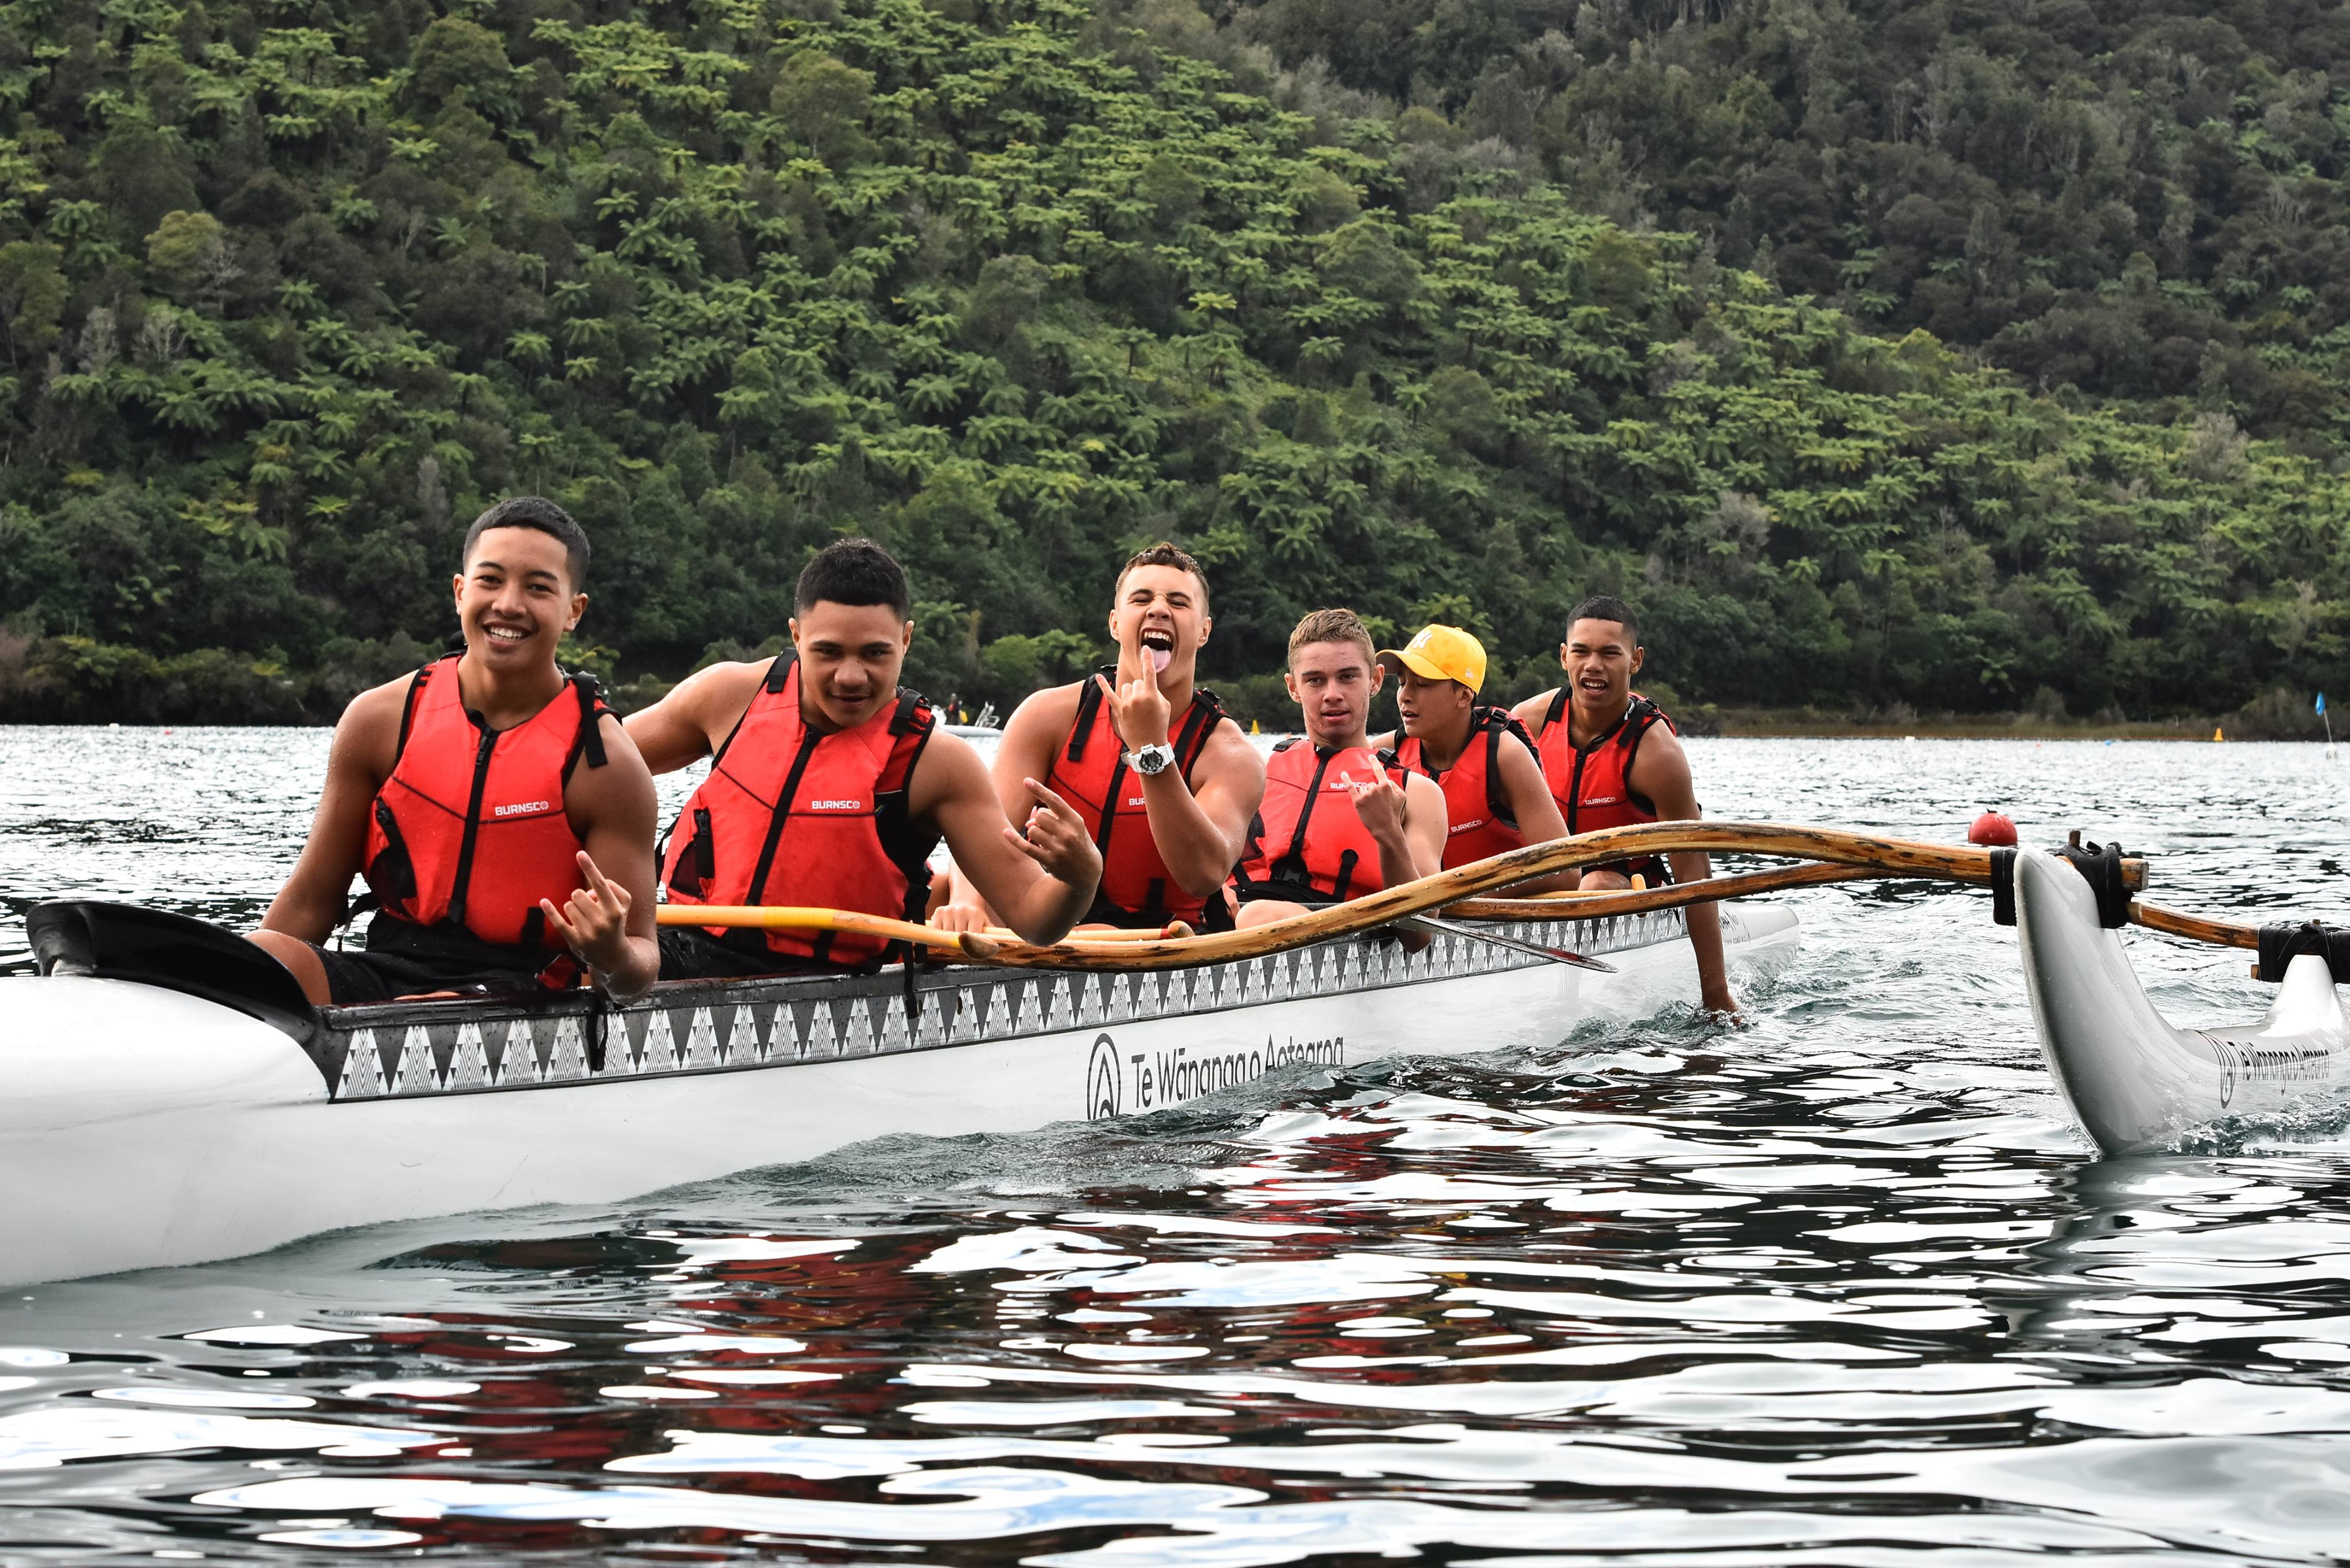 National Secondary School Waka Ama Champs 2019 - That's a Wrap! Day 4 and full results for all days!